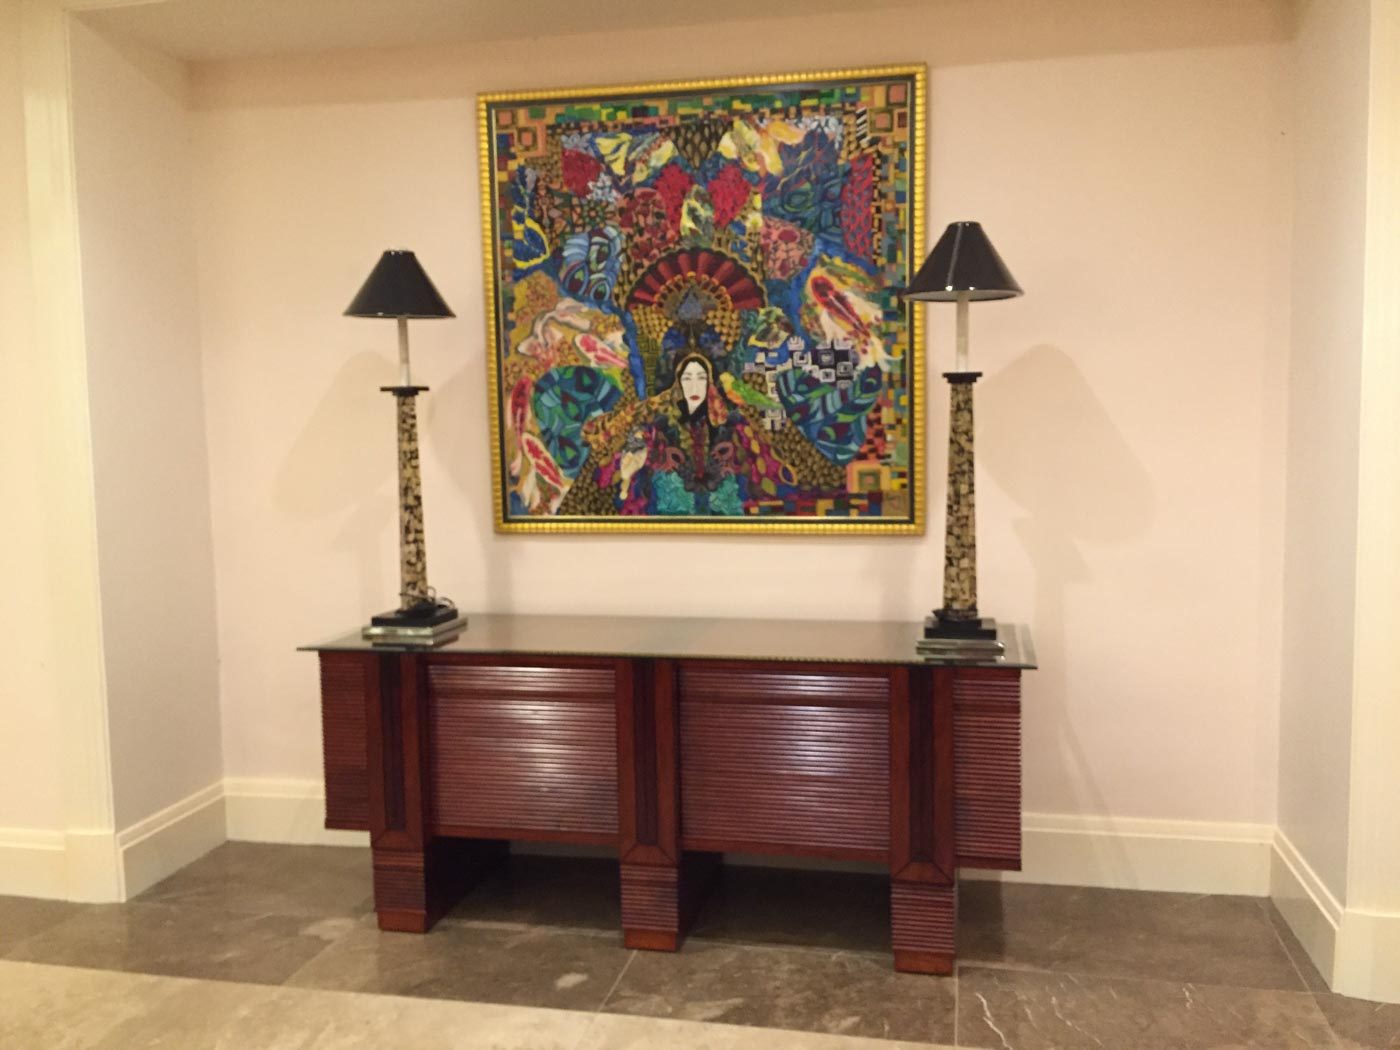 ART BY HEART. Celebrity Heart Evangelista's is among the many art pieces inside the house. Photo by Bea Cupin/Rappler 